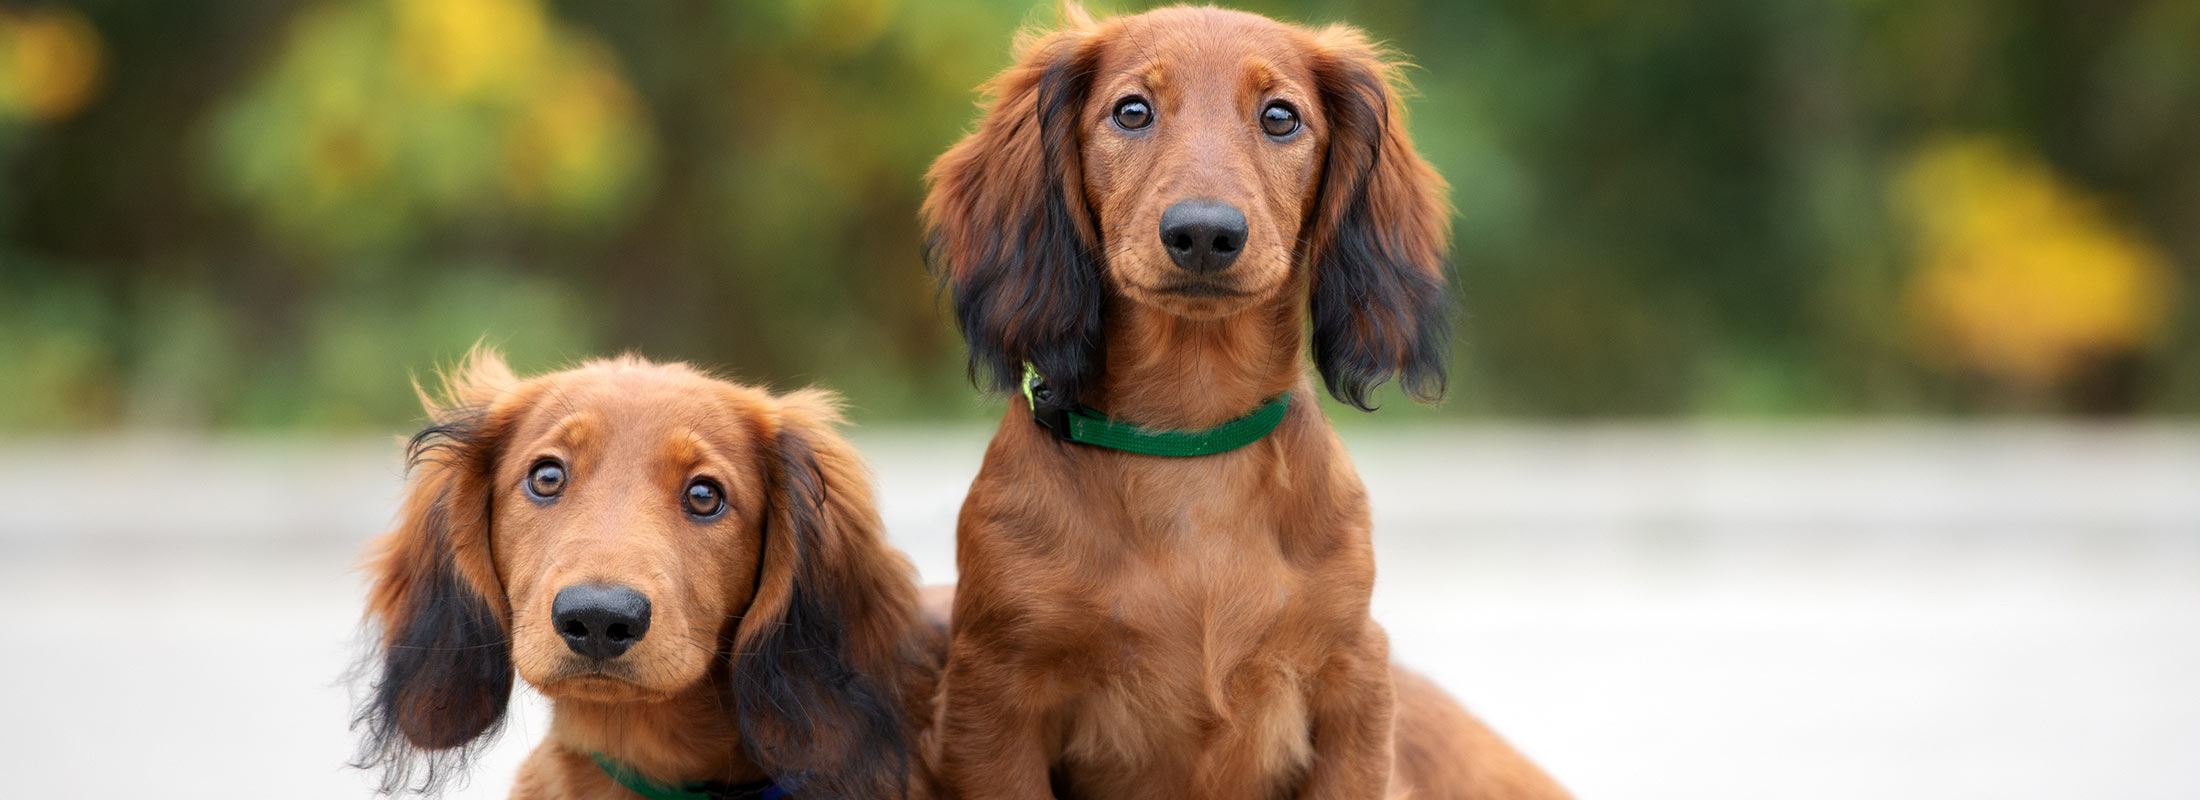 image of dachsuunds looking at camera